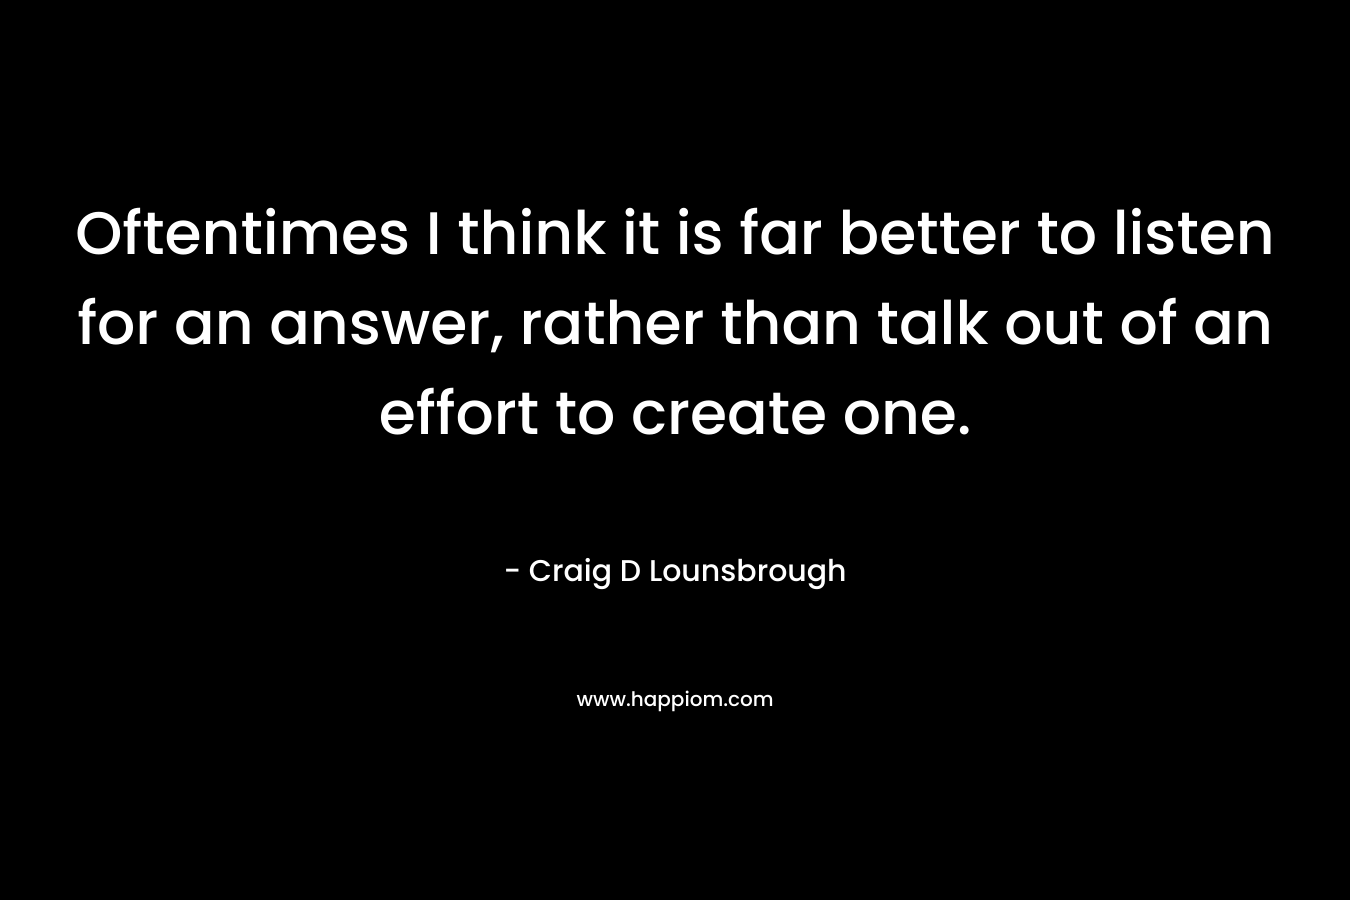 Oftentimes I think it is far better to listen for an answer, rather than talk out of an effort to create one.